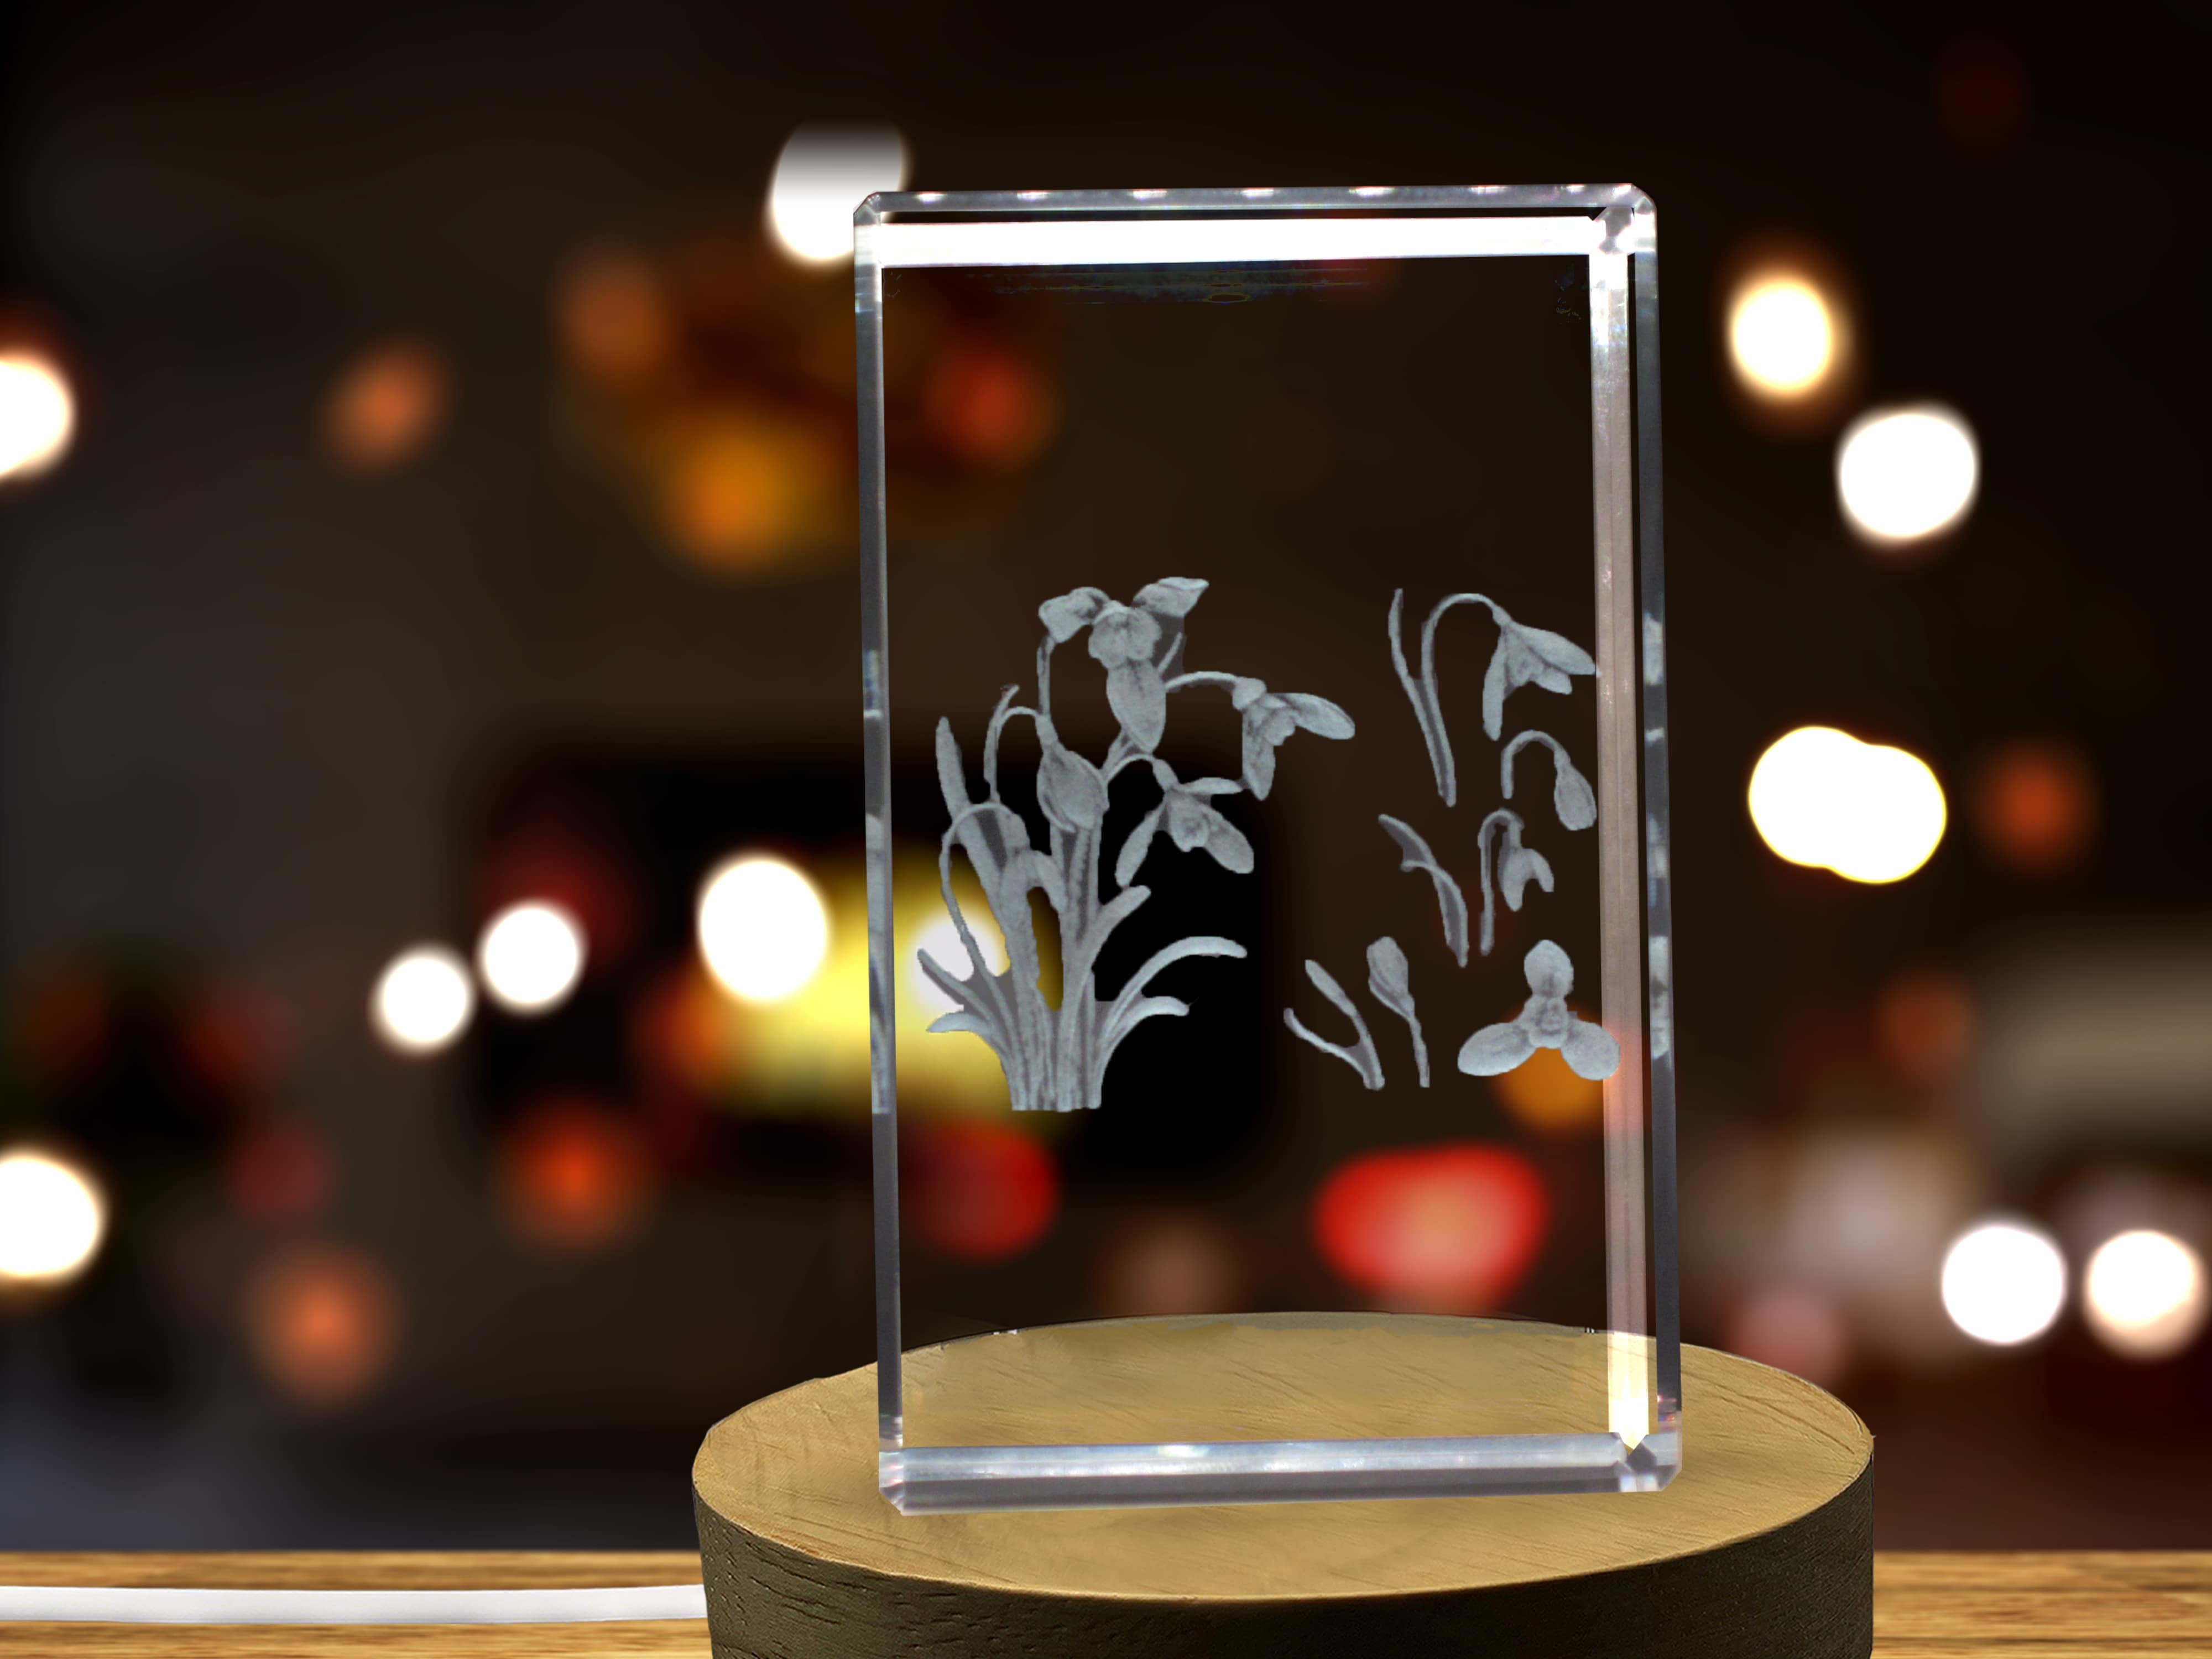 Snowdrop Flower 3D Engraved Crystal 3D Engraved Crystal Keepsake/Gift/Decor/Collectible/Souvenir A&B Crystal Collection